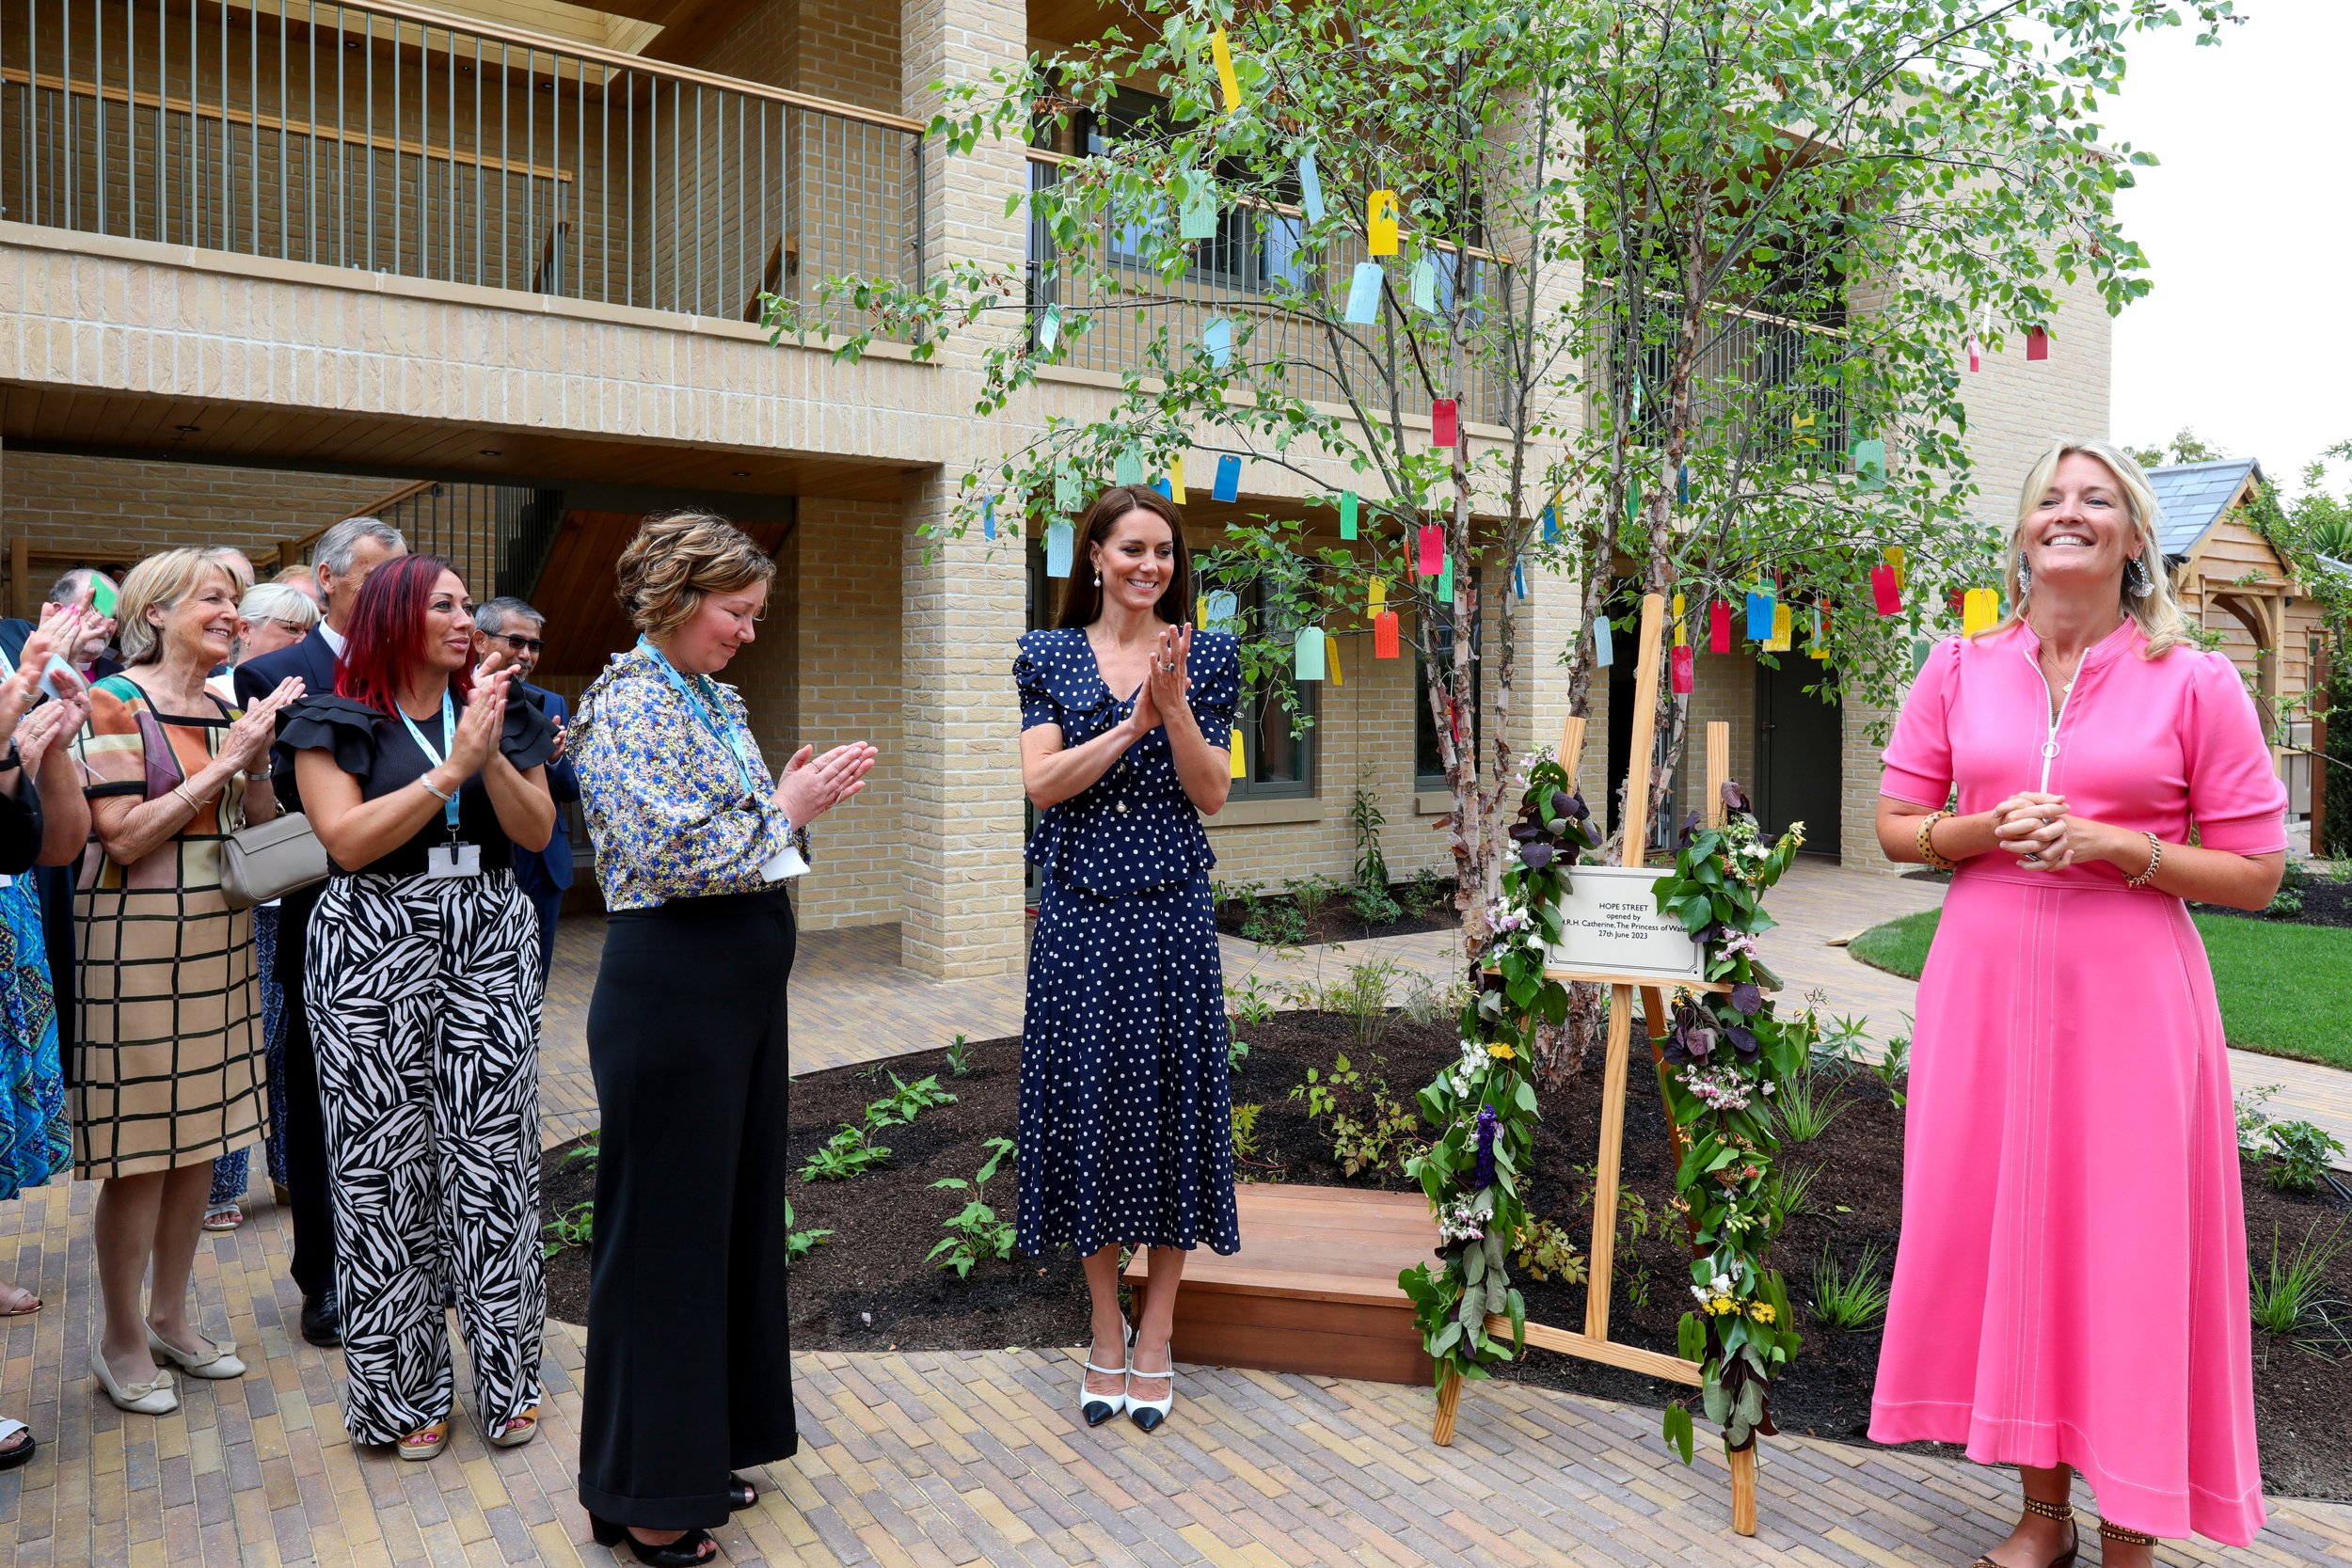 Edwina Grosvenor and HRH unveiling a plaque in front of the Hope tree.